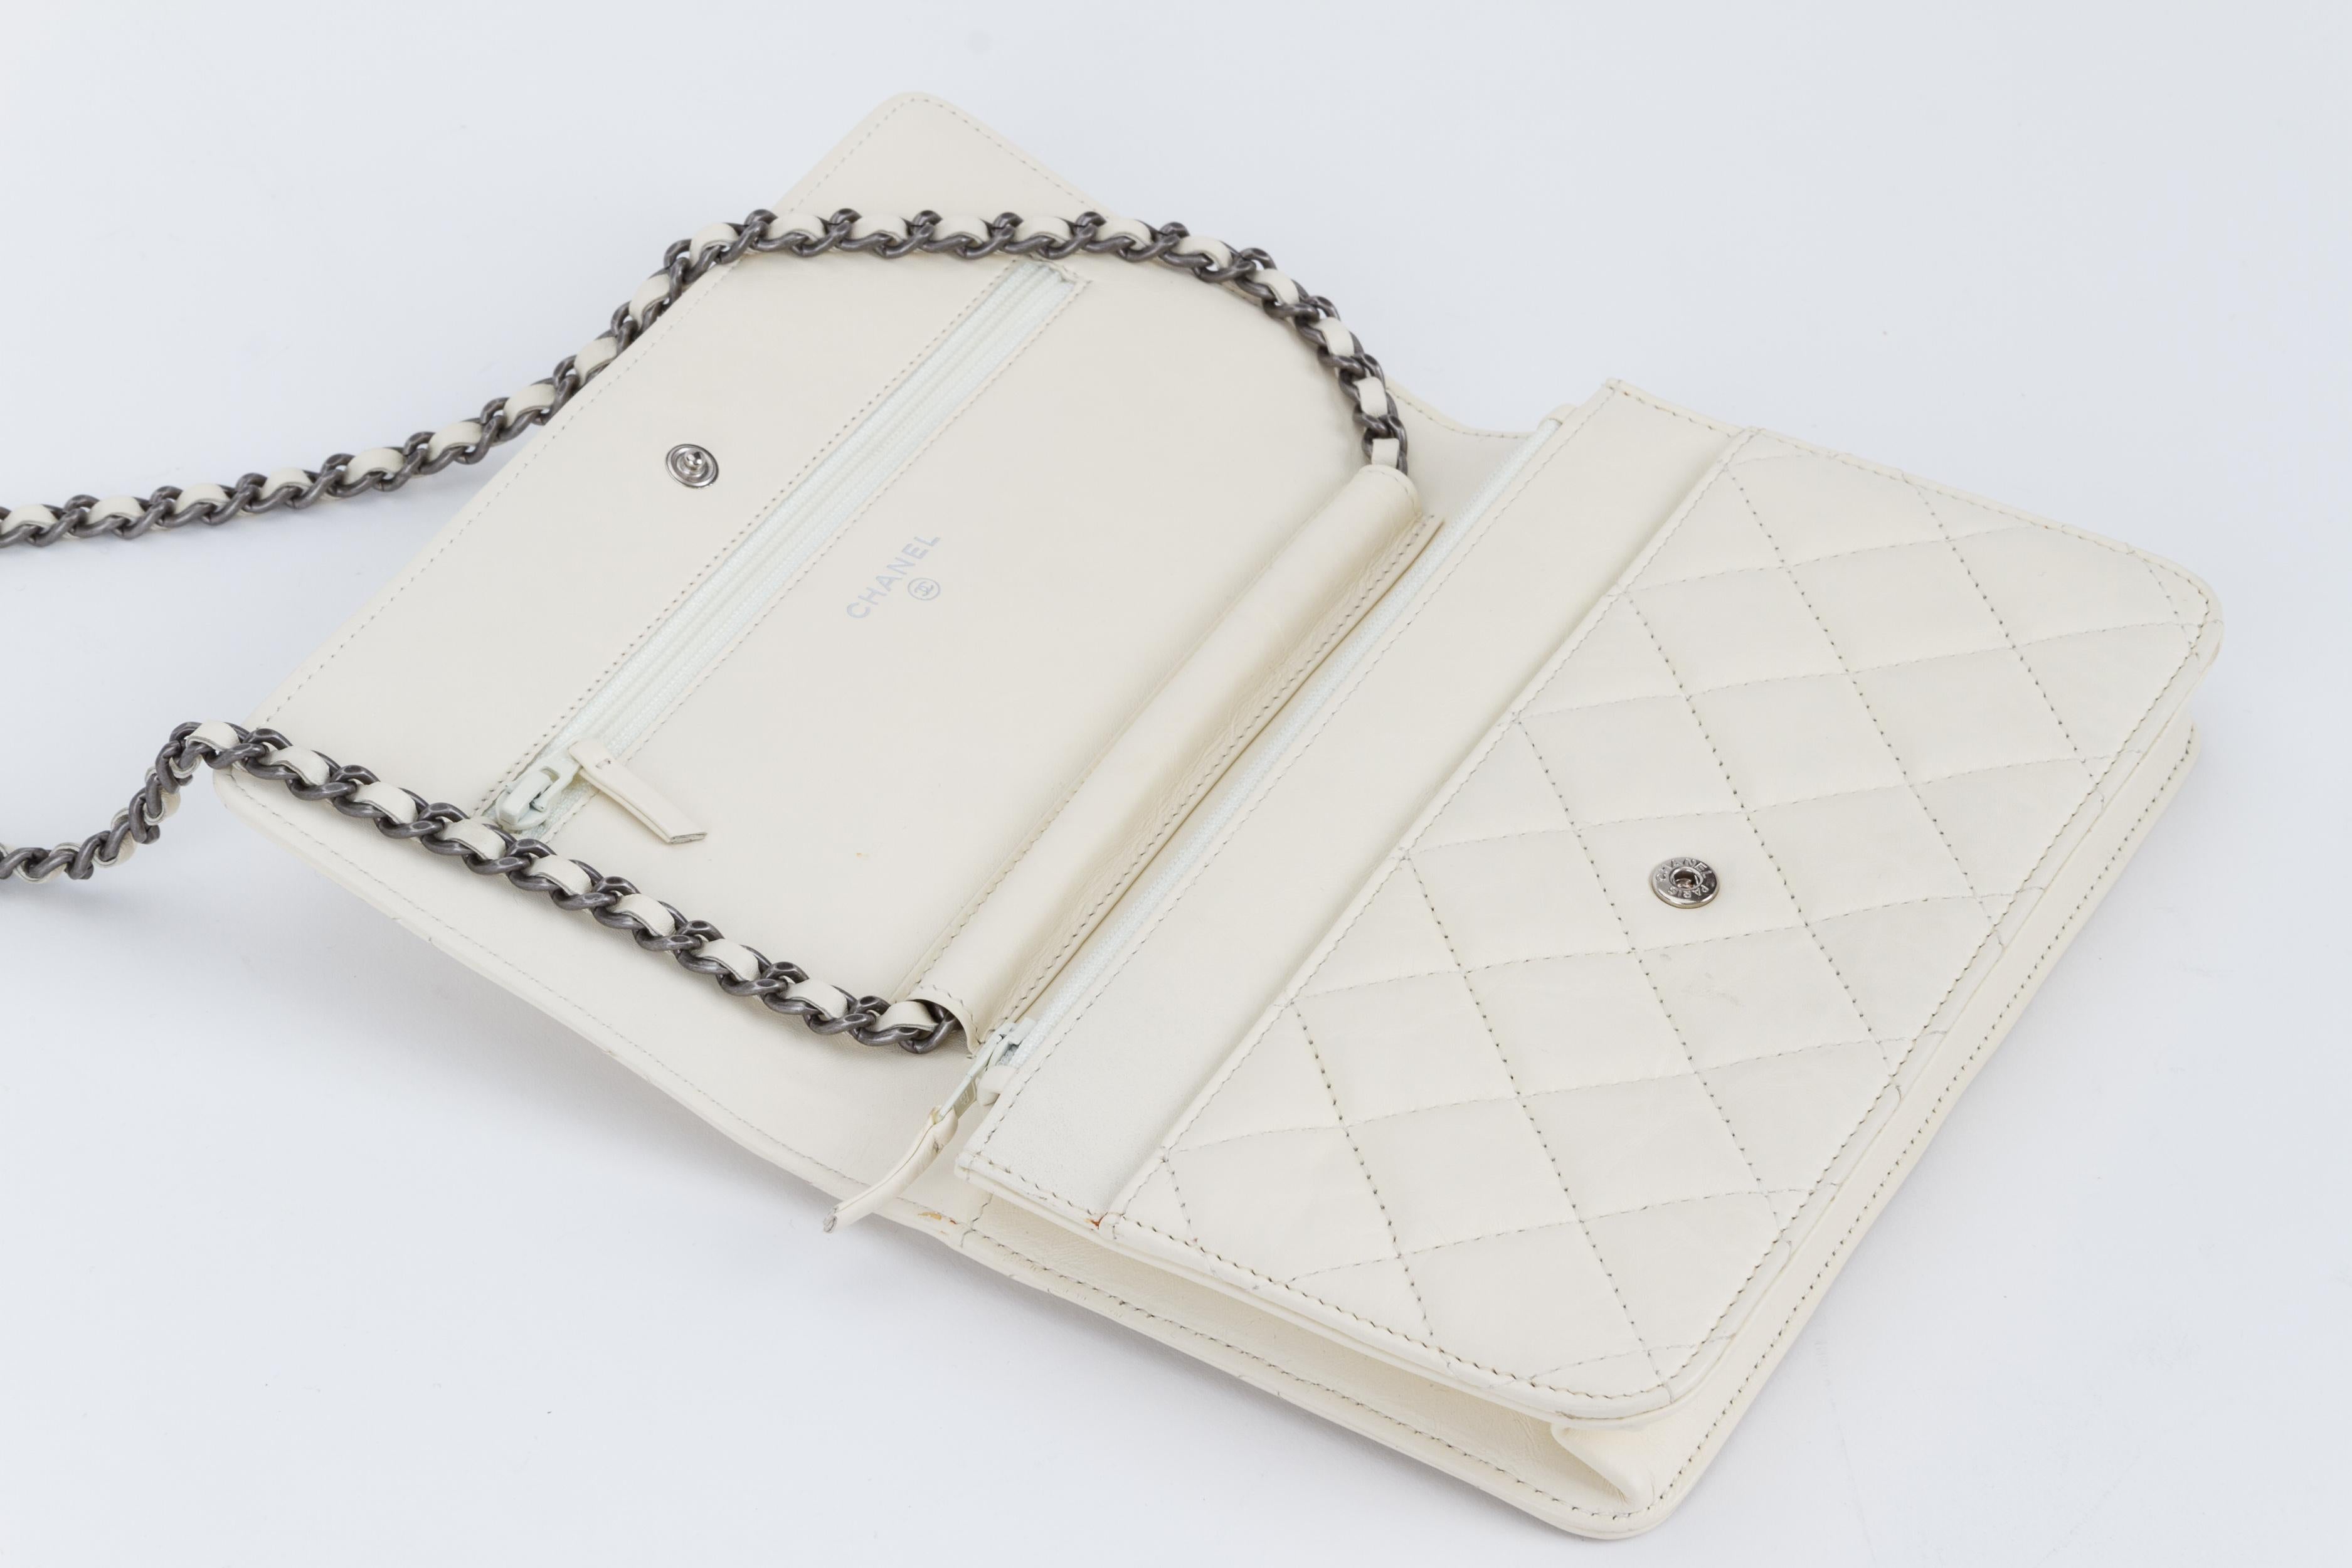 Chanel Reissue White Wallet On A Chain Bag 3